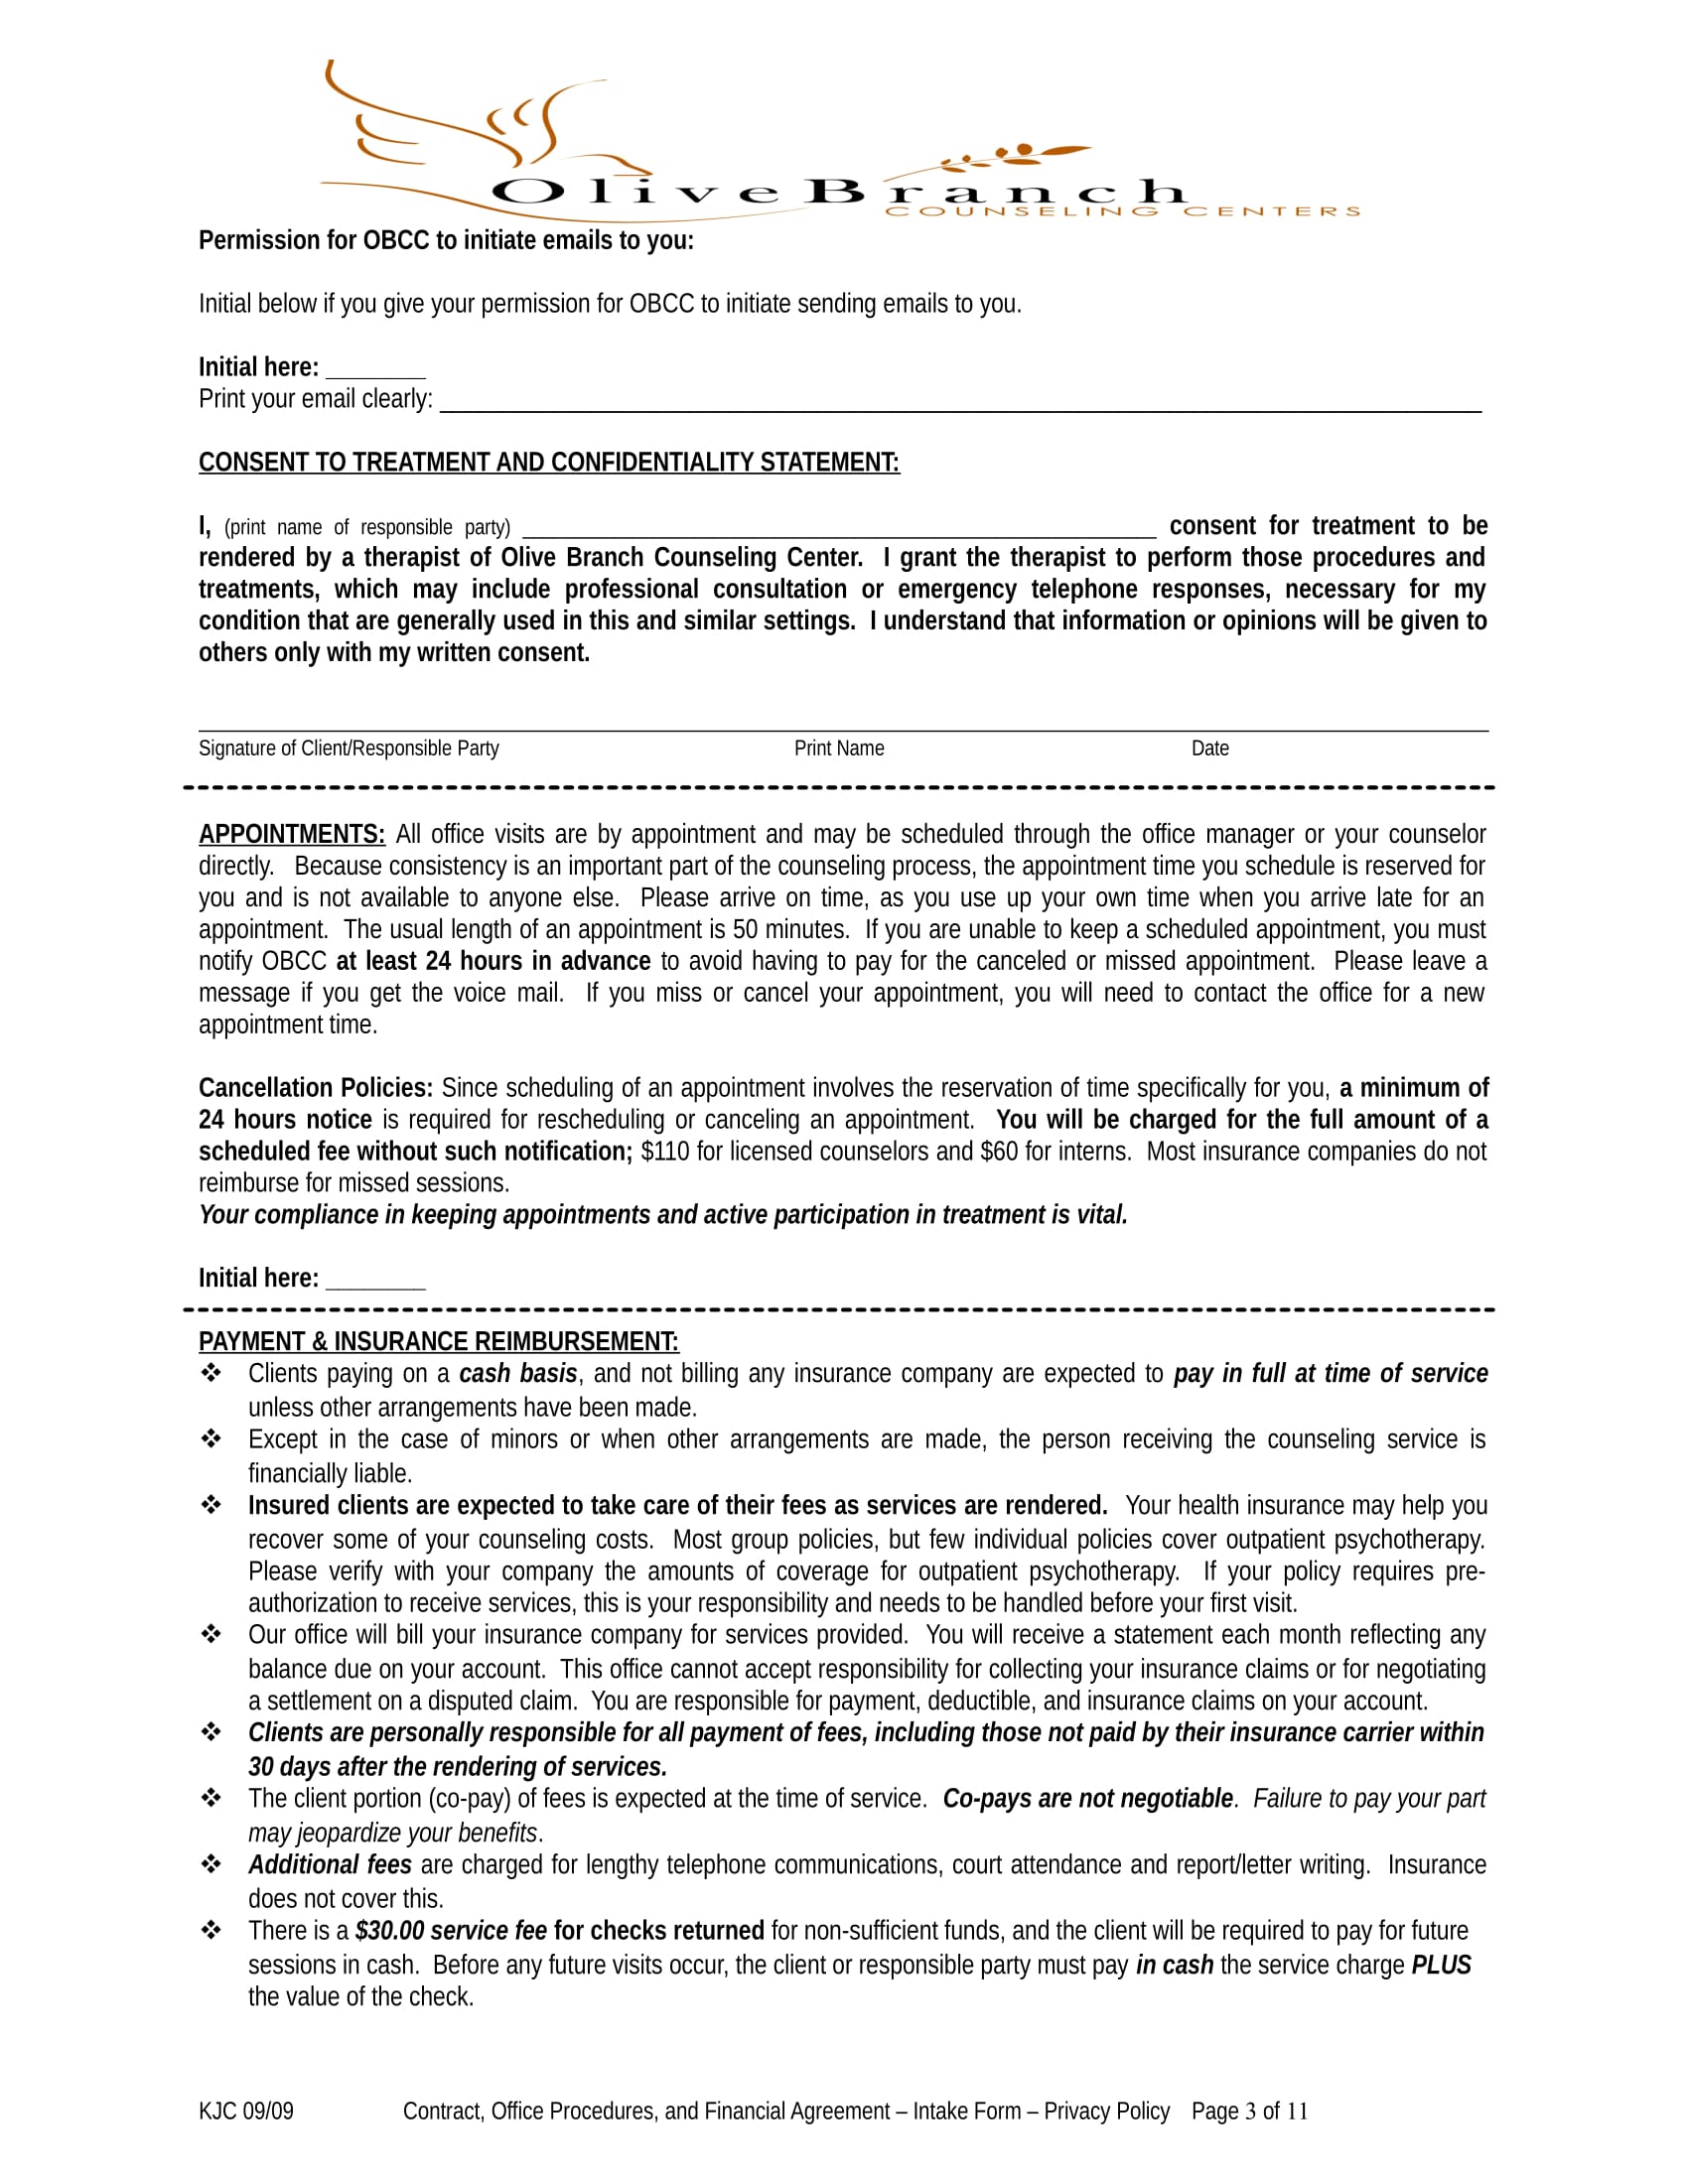 counseling center confidentiality statement form 03